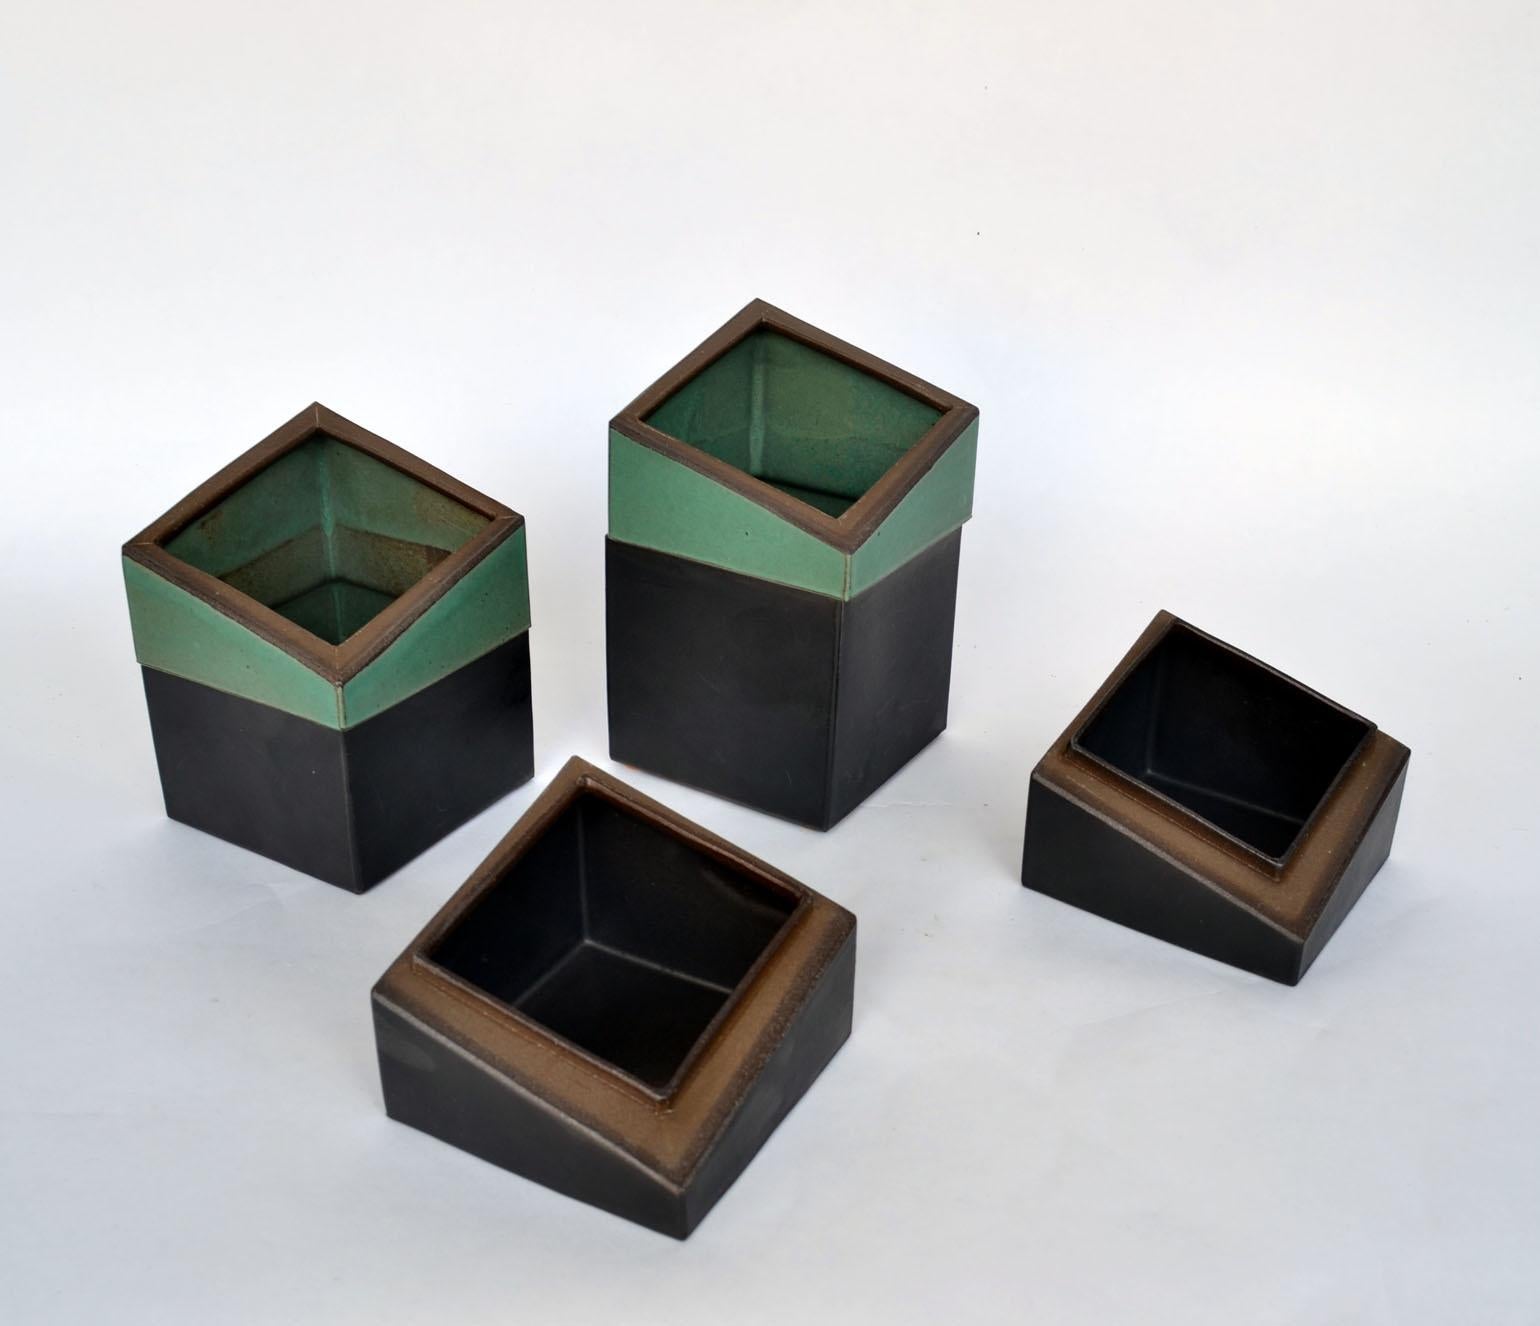 Sculptural square studio pottery boxes, signed PS. The geometric design is emphasised by the alternating green and black glazed sections. The lids fit precisely on the bases of the late 20th century stoneware boxes.

Dimensions:
18.5 x 10 x 10